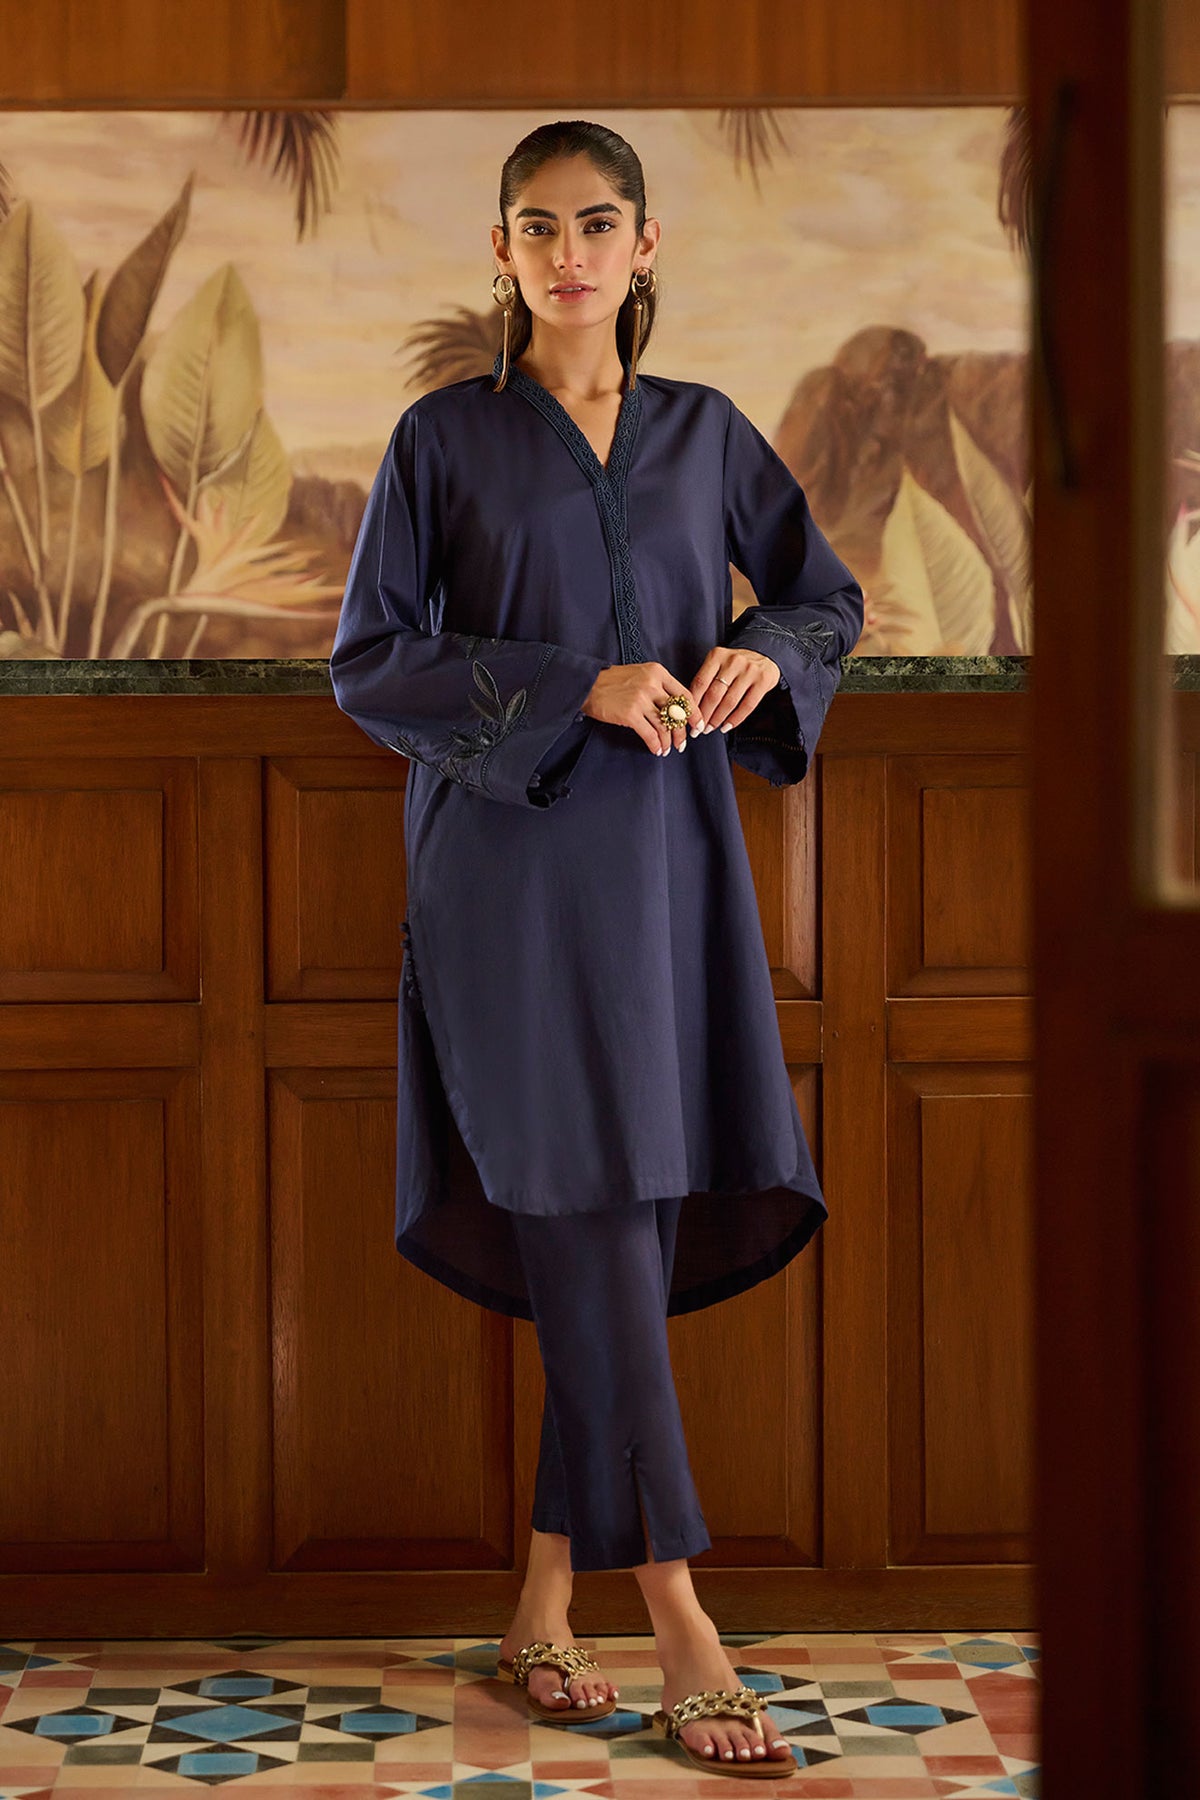 DC-2172 NAVY BLUE 2PCS  EMBROIDERED KURTA WITH TROUSER